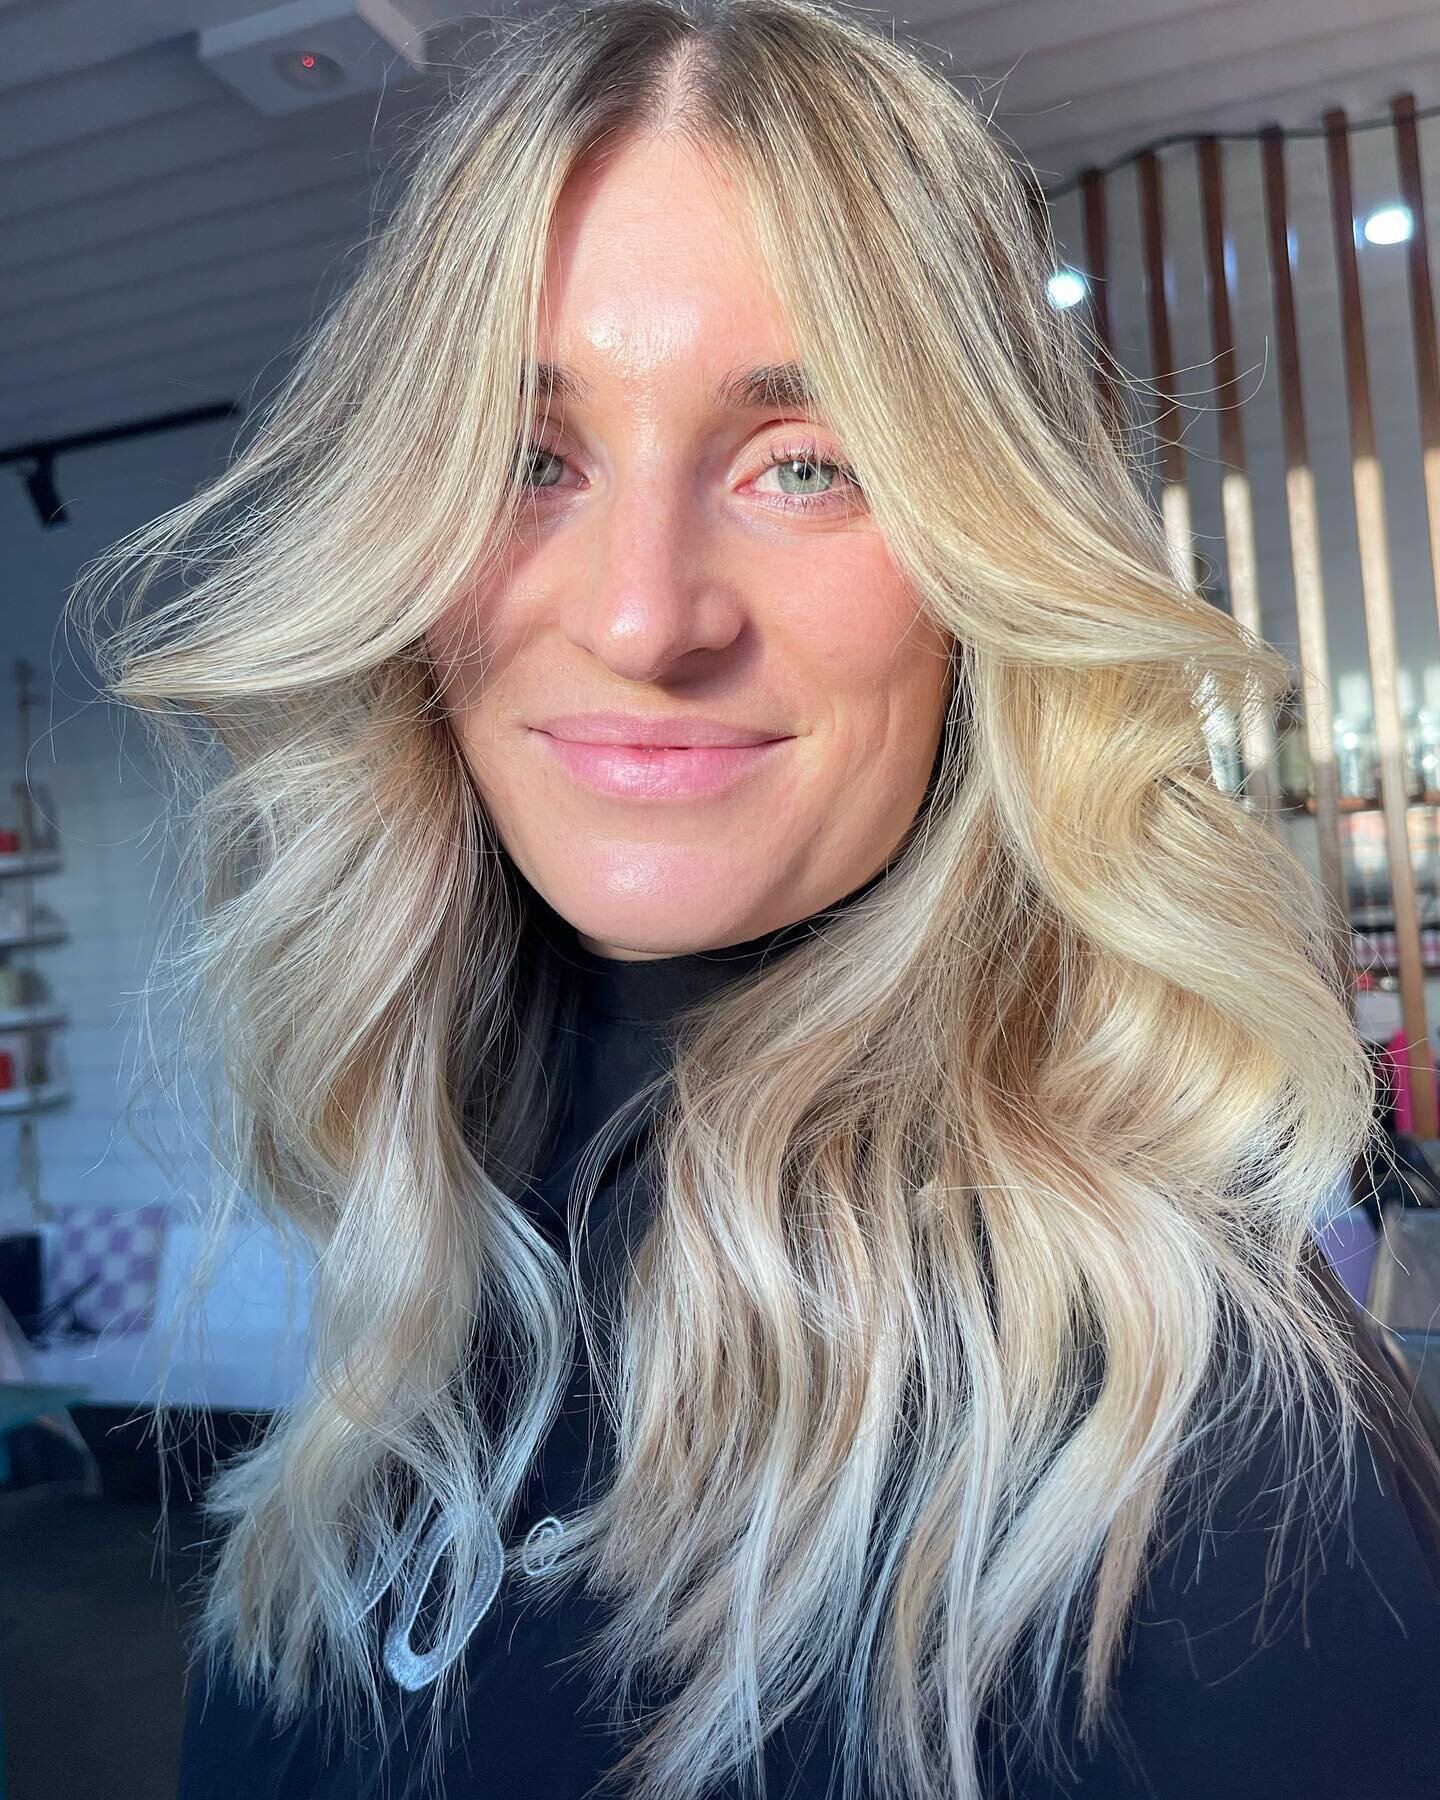 Afternoon glow ✨✨ with the perfect freshen up by @meg.rinsdhair + @bre_rinsdhair using @shades_eq 

Few spots left before Christmas, slide into our DM&rsquo;s before they are gone❤️&zwj;🔥

@powernetworkaus @foilmefoils @kevin.murphy.australia @eleve